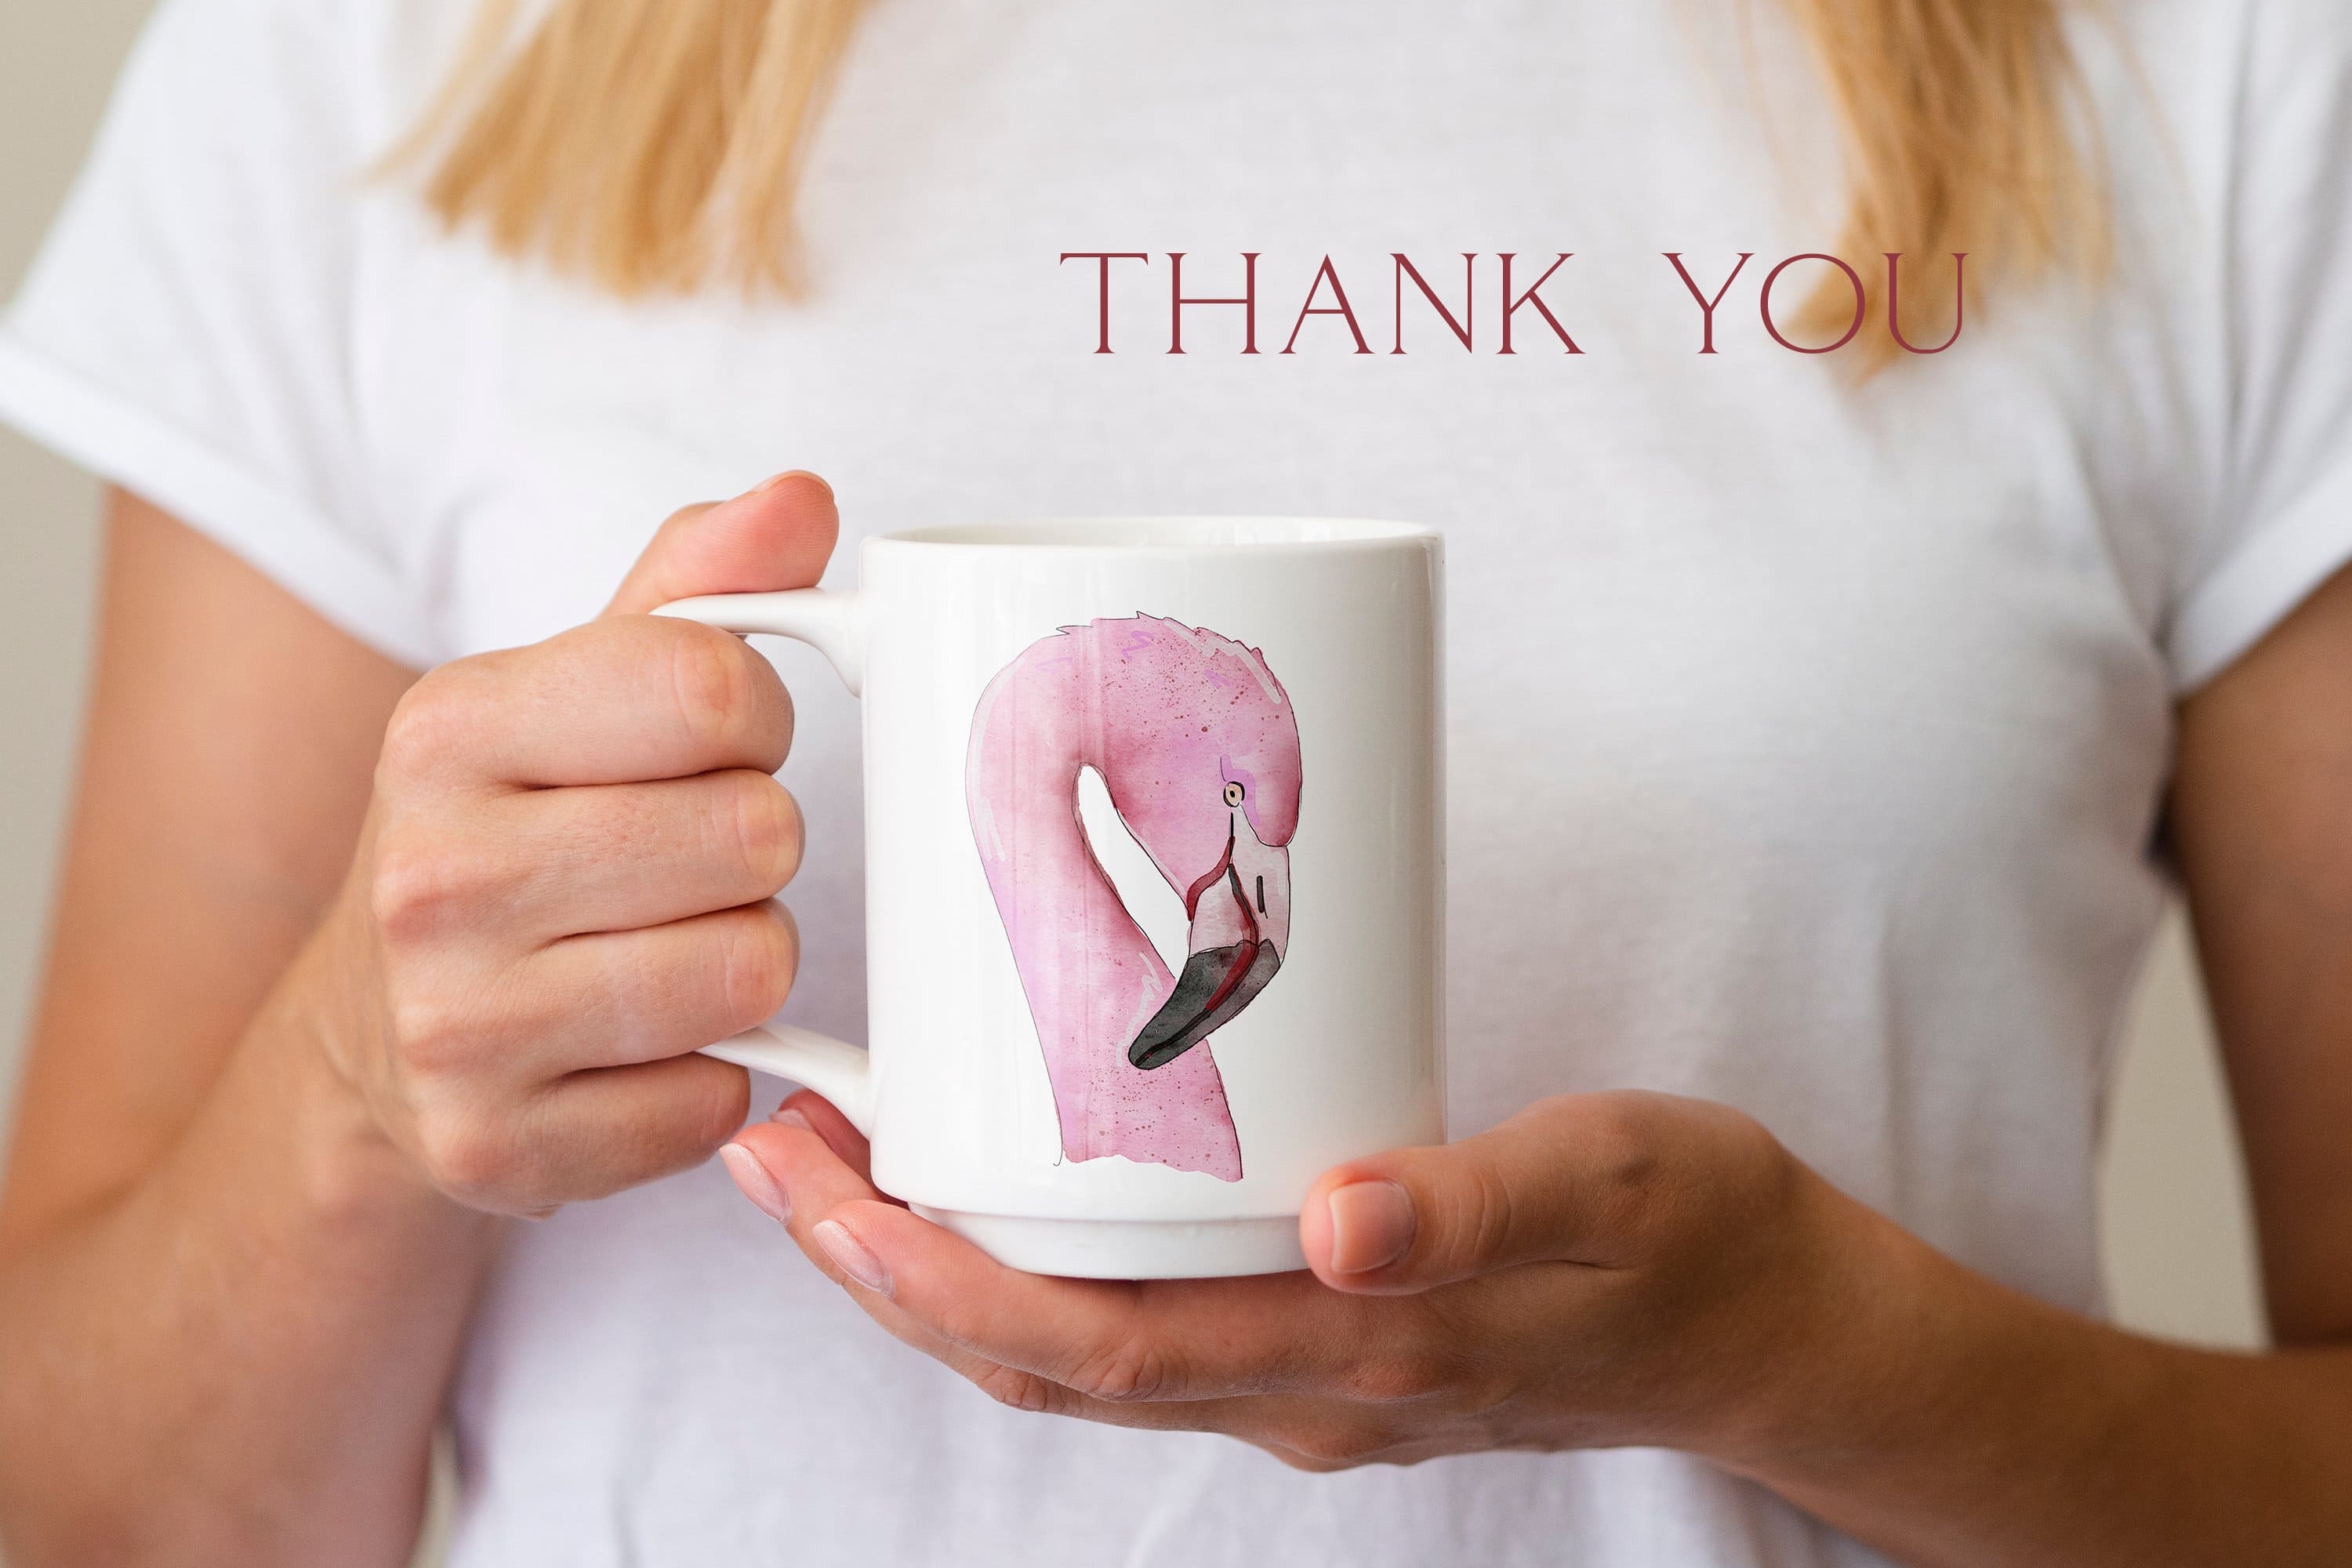 The head of a pink flamingo is painted on the white cup.